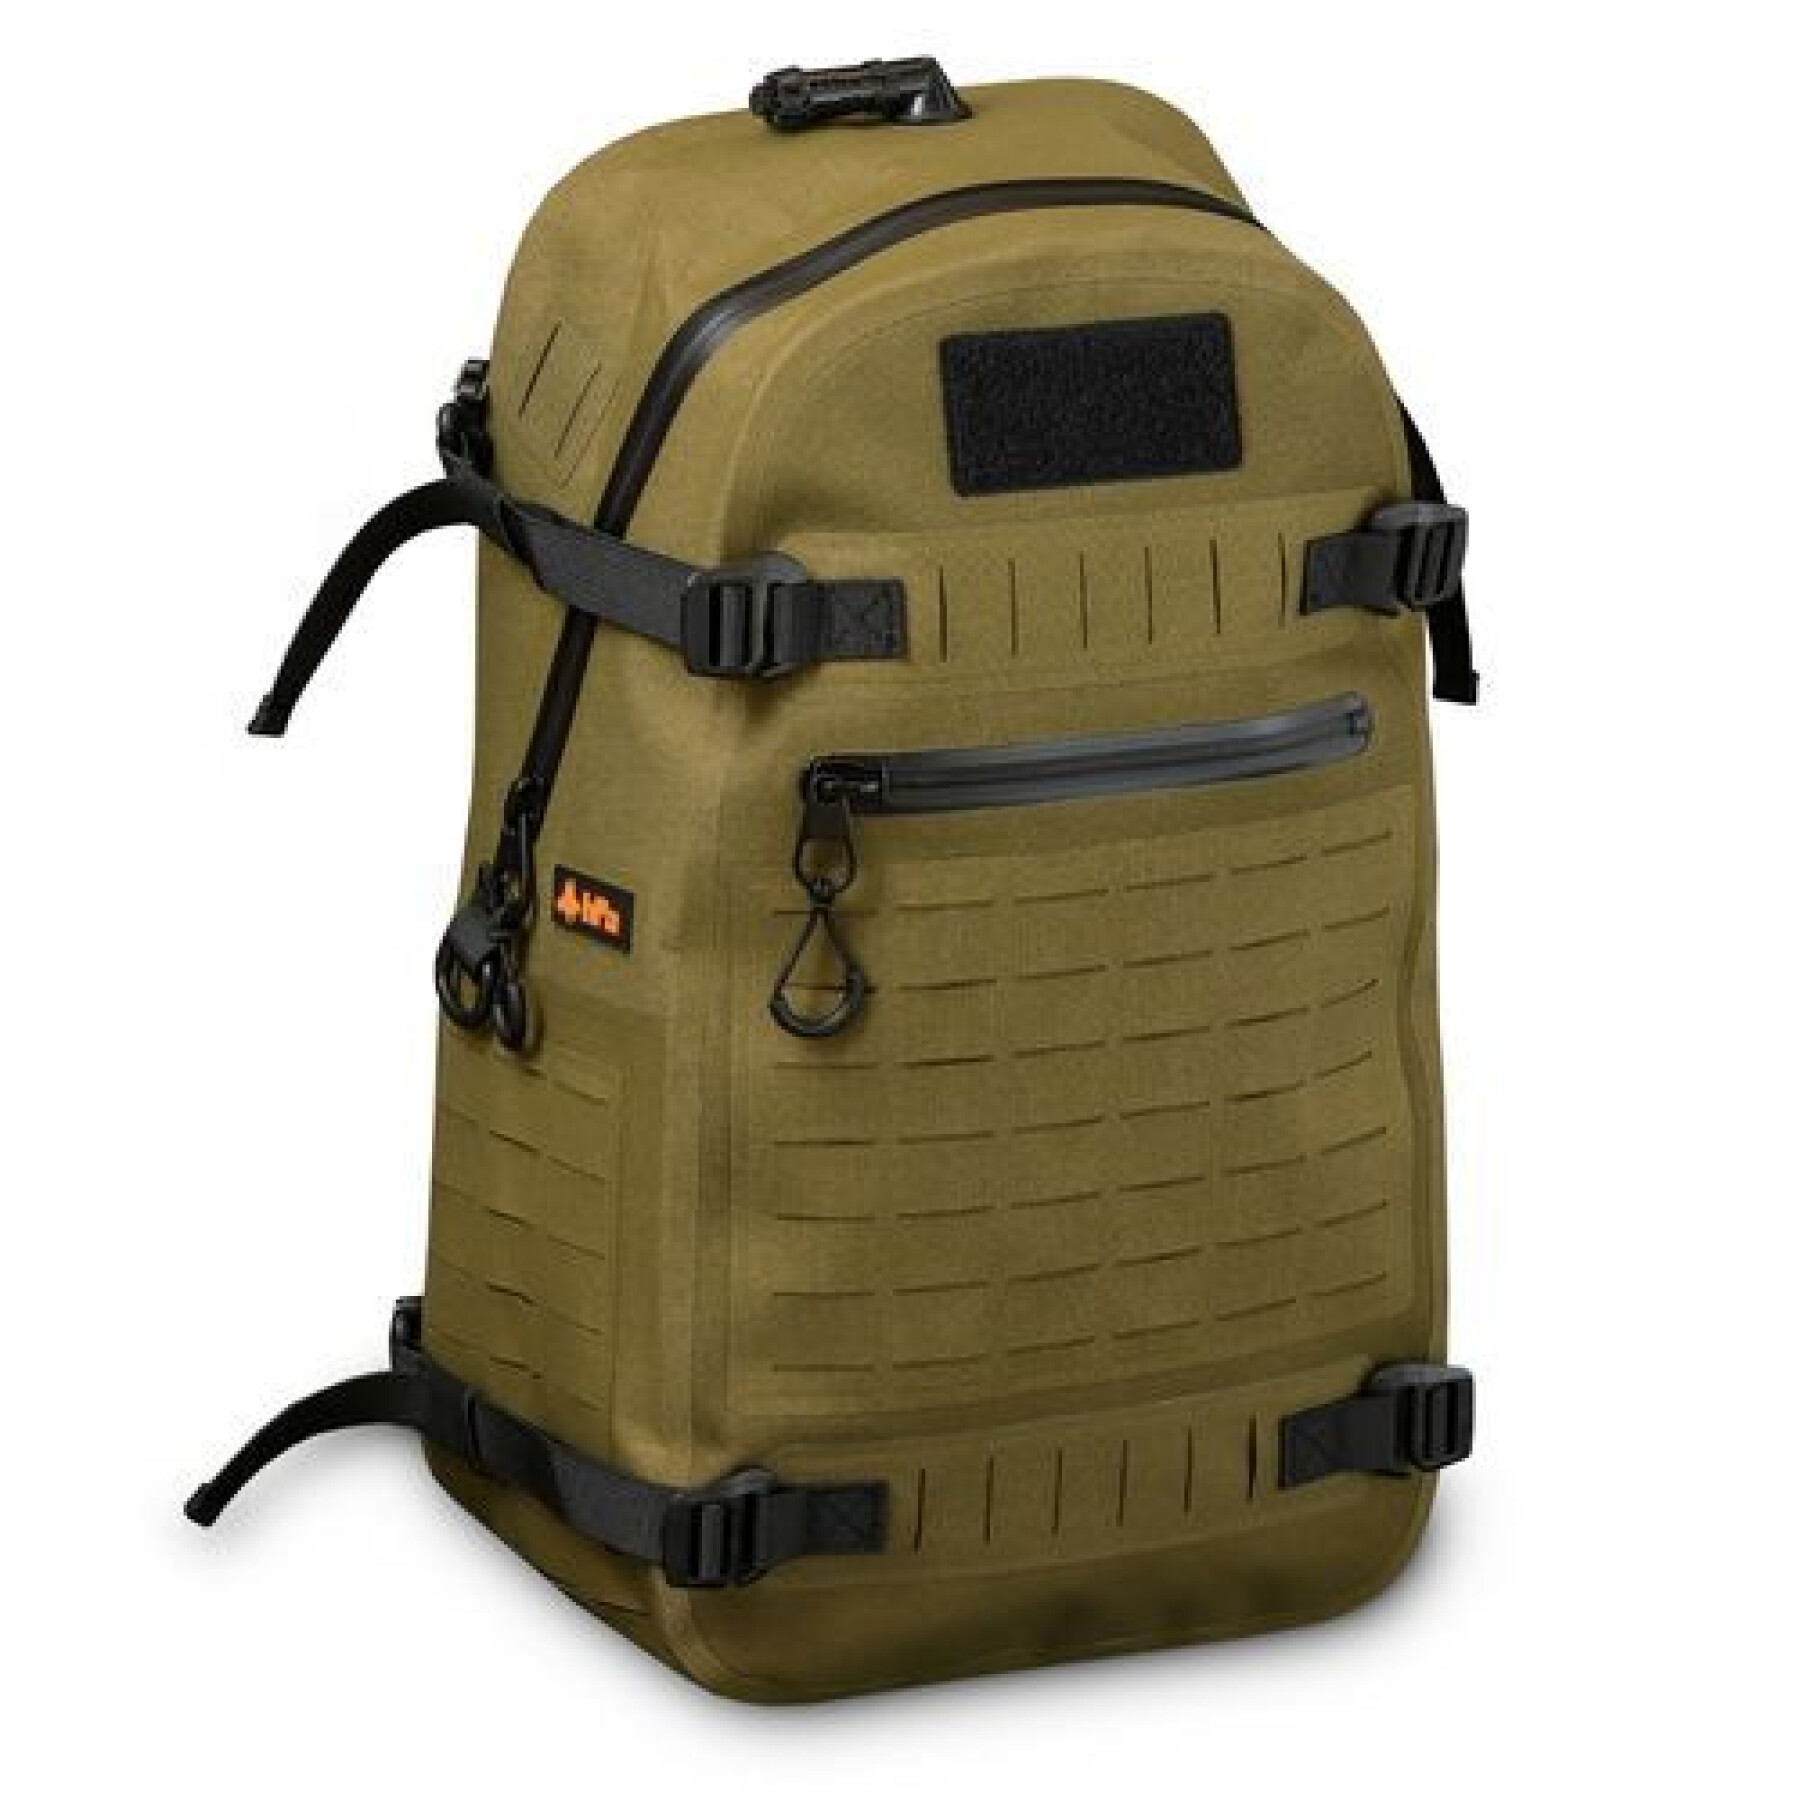 Waterproof bag with 2 zipper system Hpa MK2